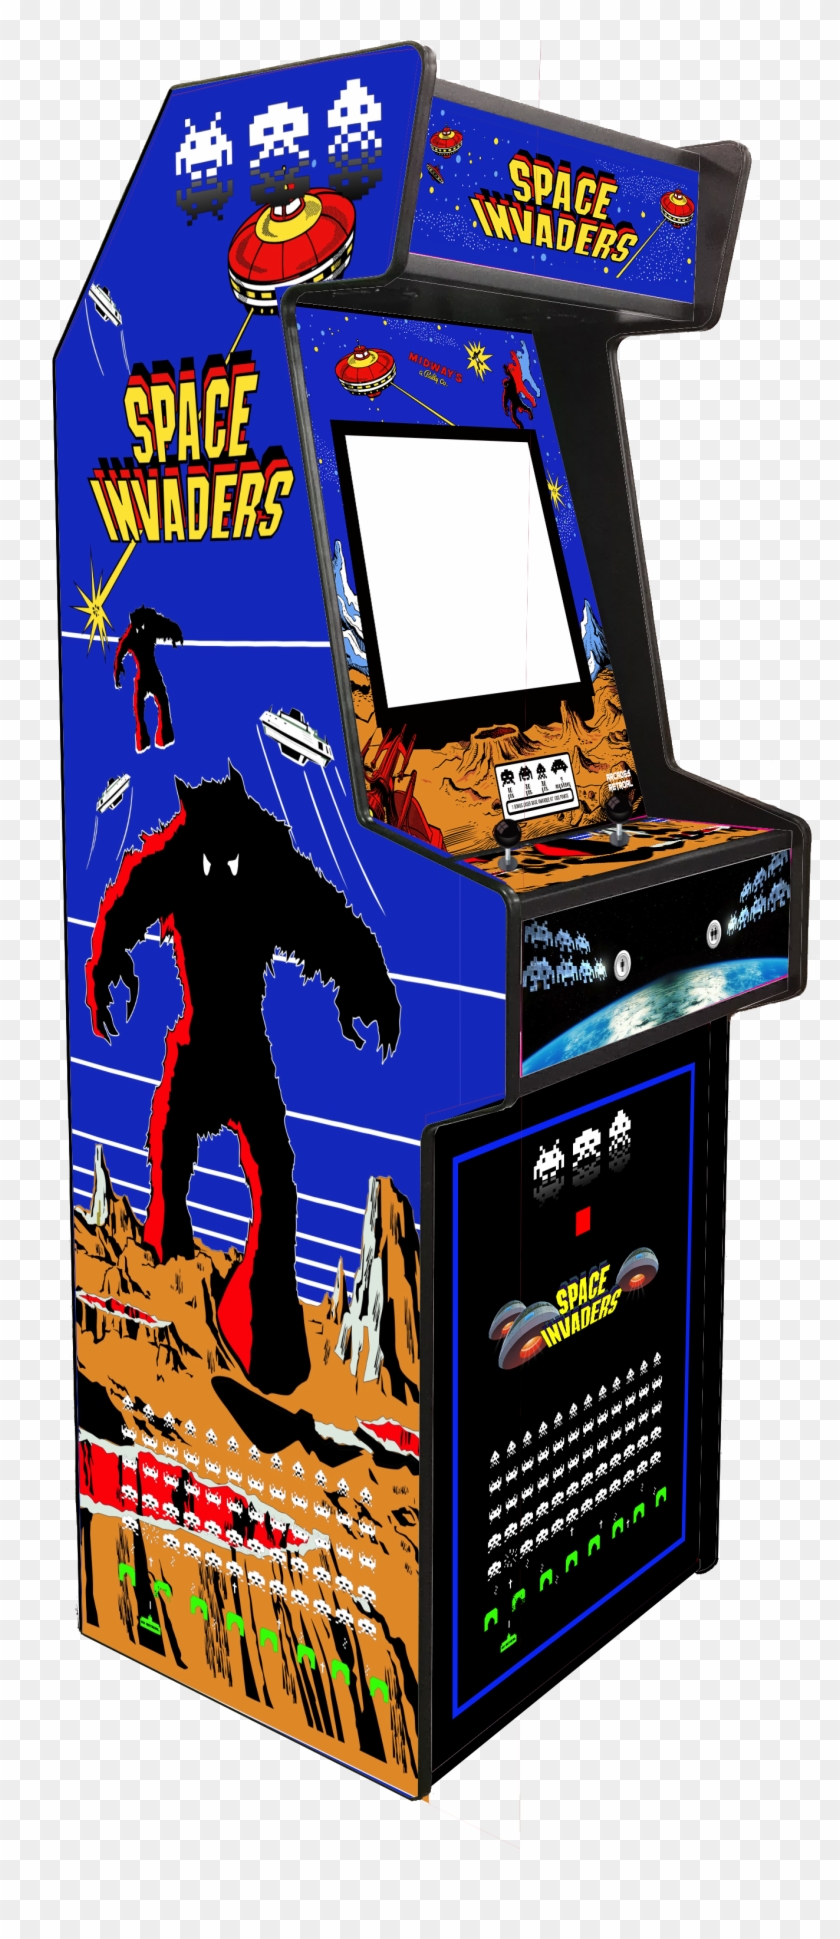 Retroone Edici N - Space Invaders Dx Arcade Cabinet Clipart #4172300